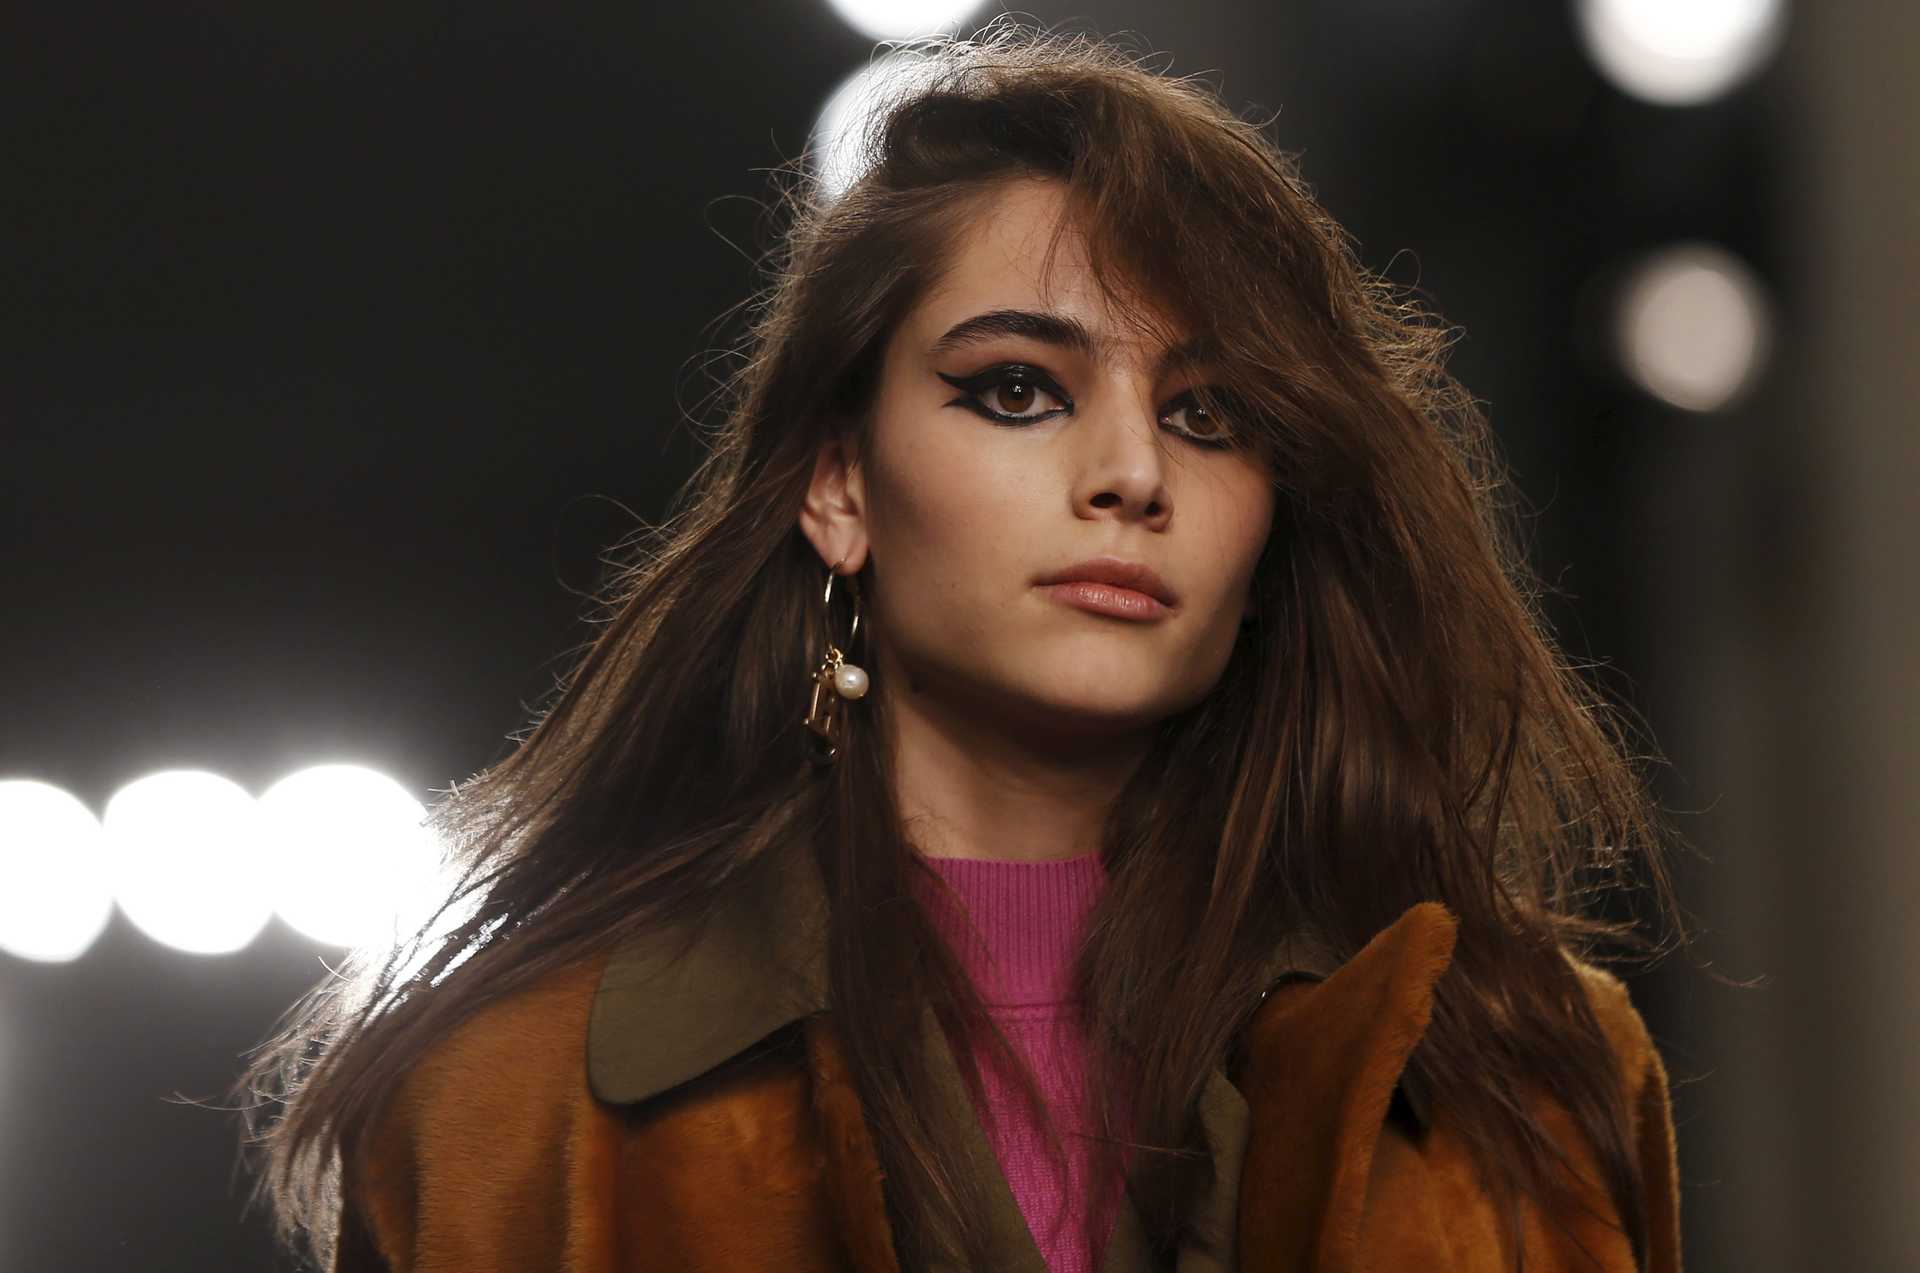 A model presents a creation at the Topshop Unique catwalk show at London Fashion Week Autumn/Winter 2016 in London, Britain